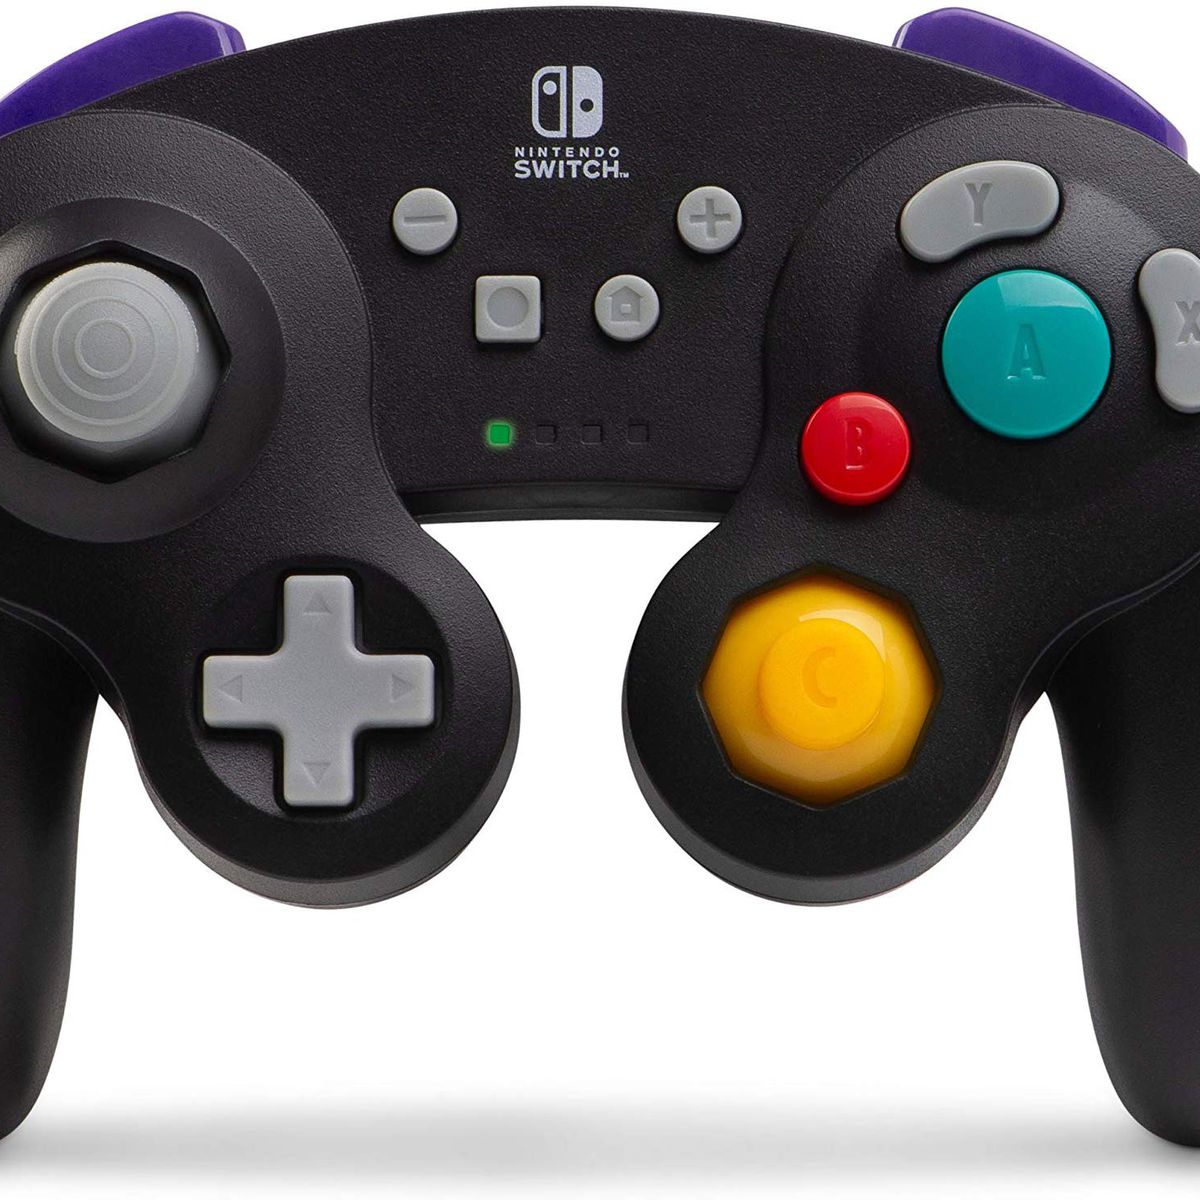 A product shot of a black wireless GameCube-style controller